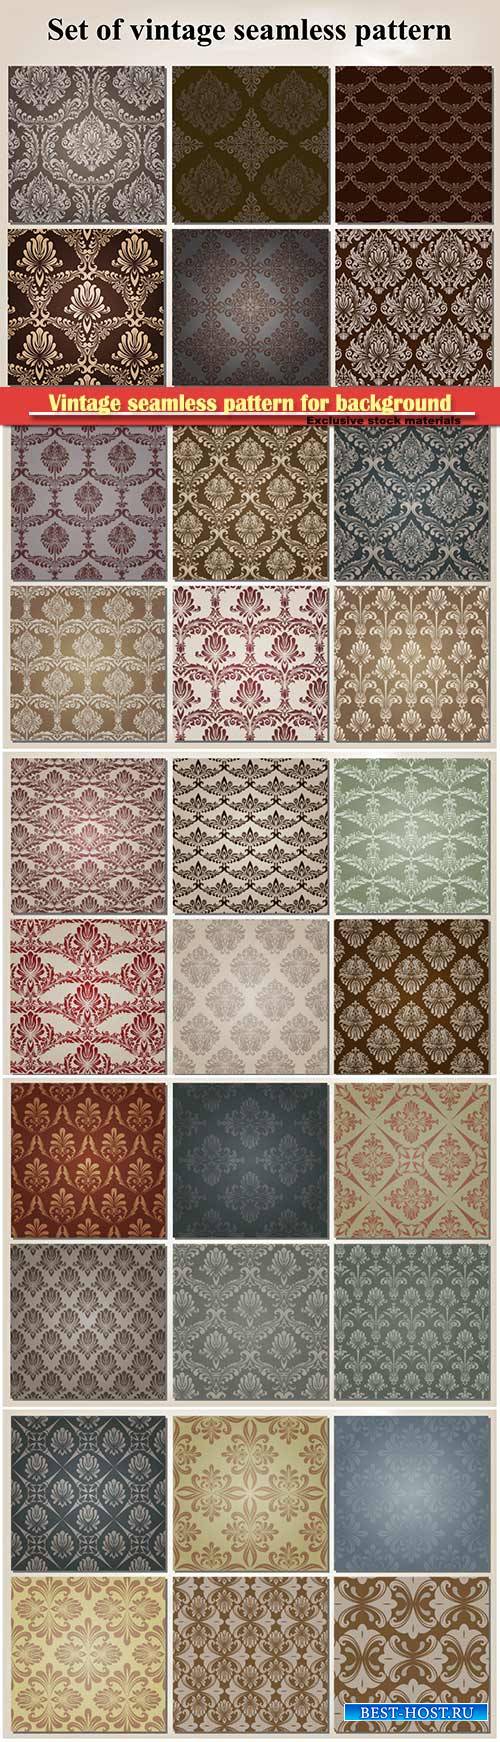 Vintage seamless pattern for background, pattern in swatches